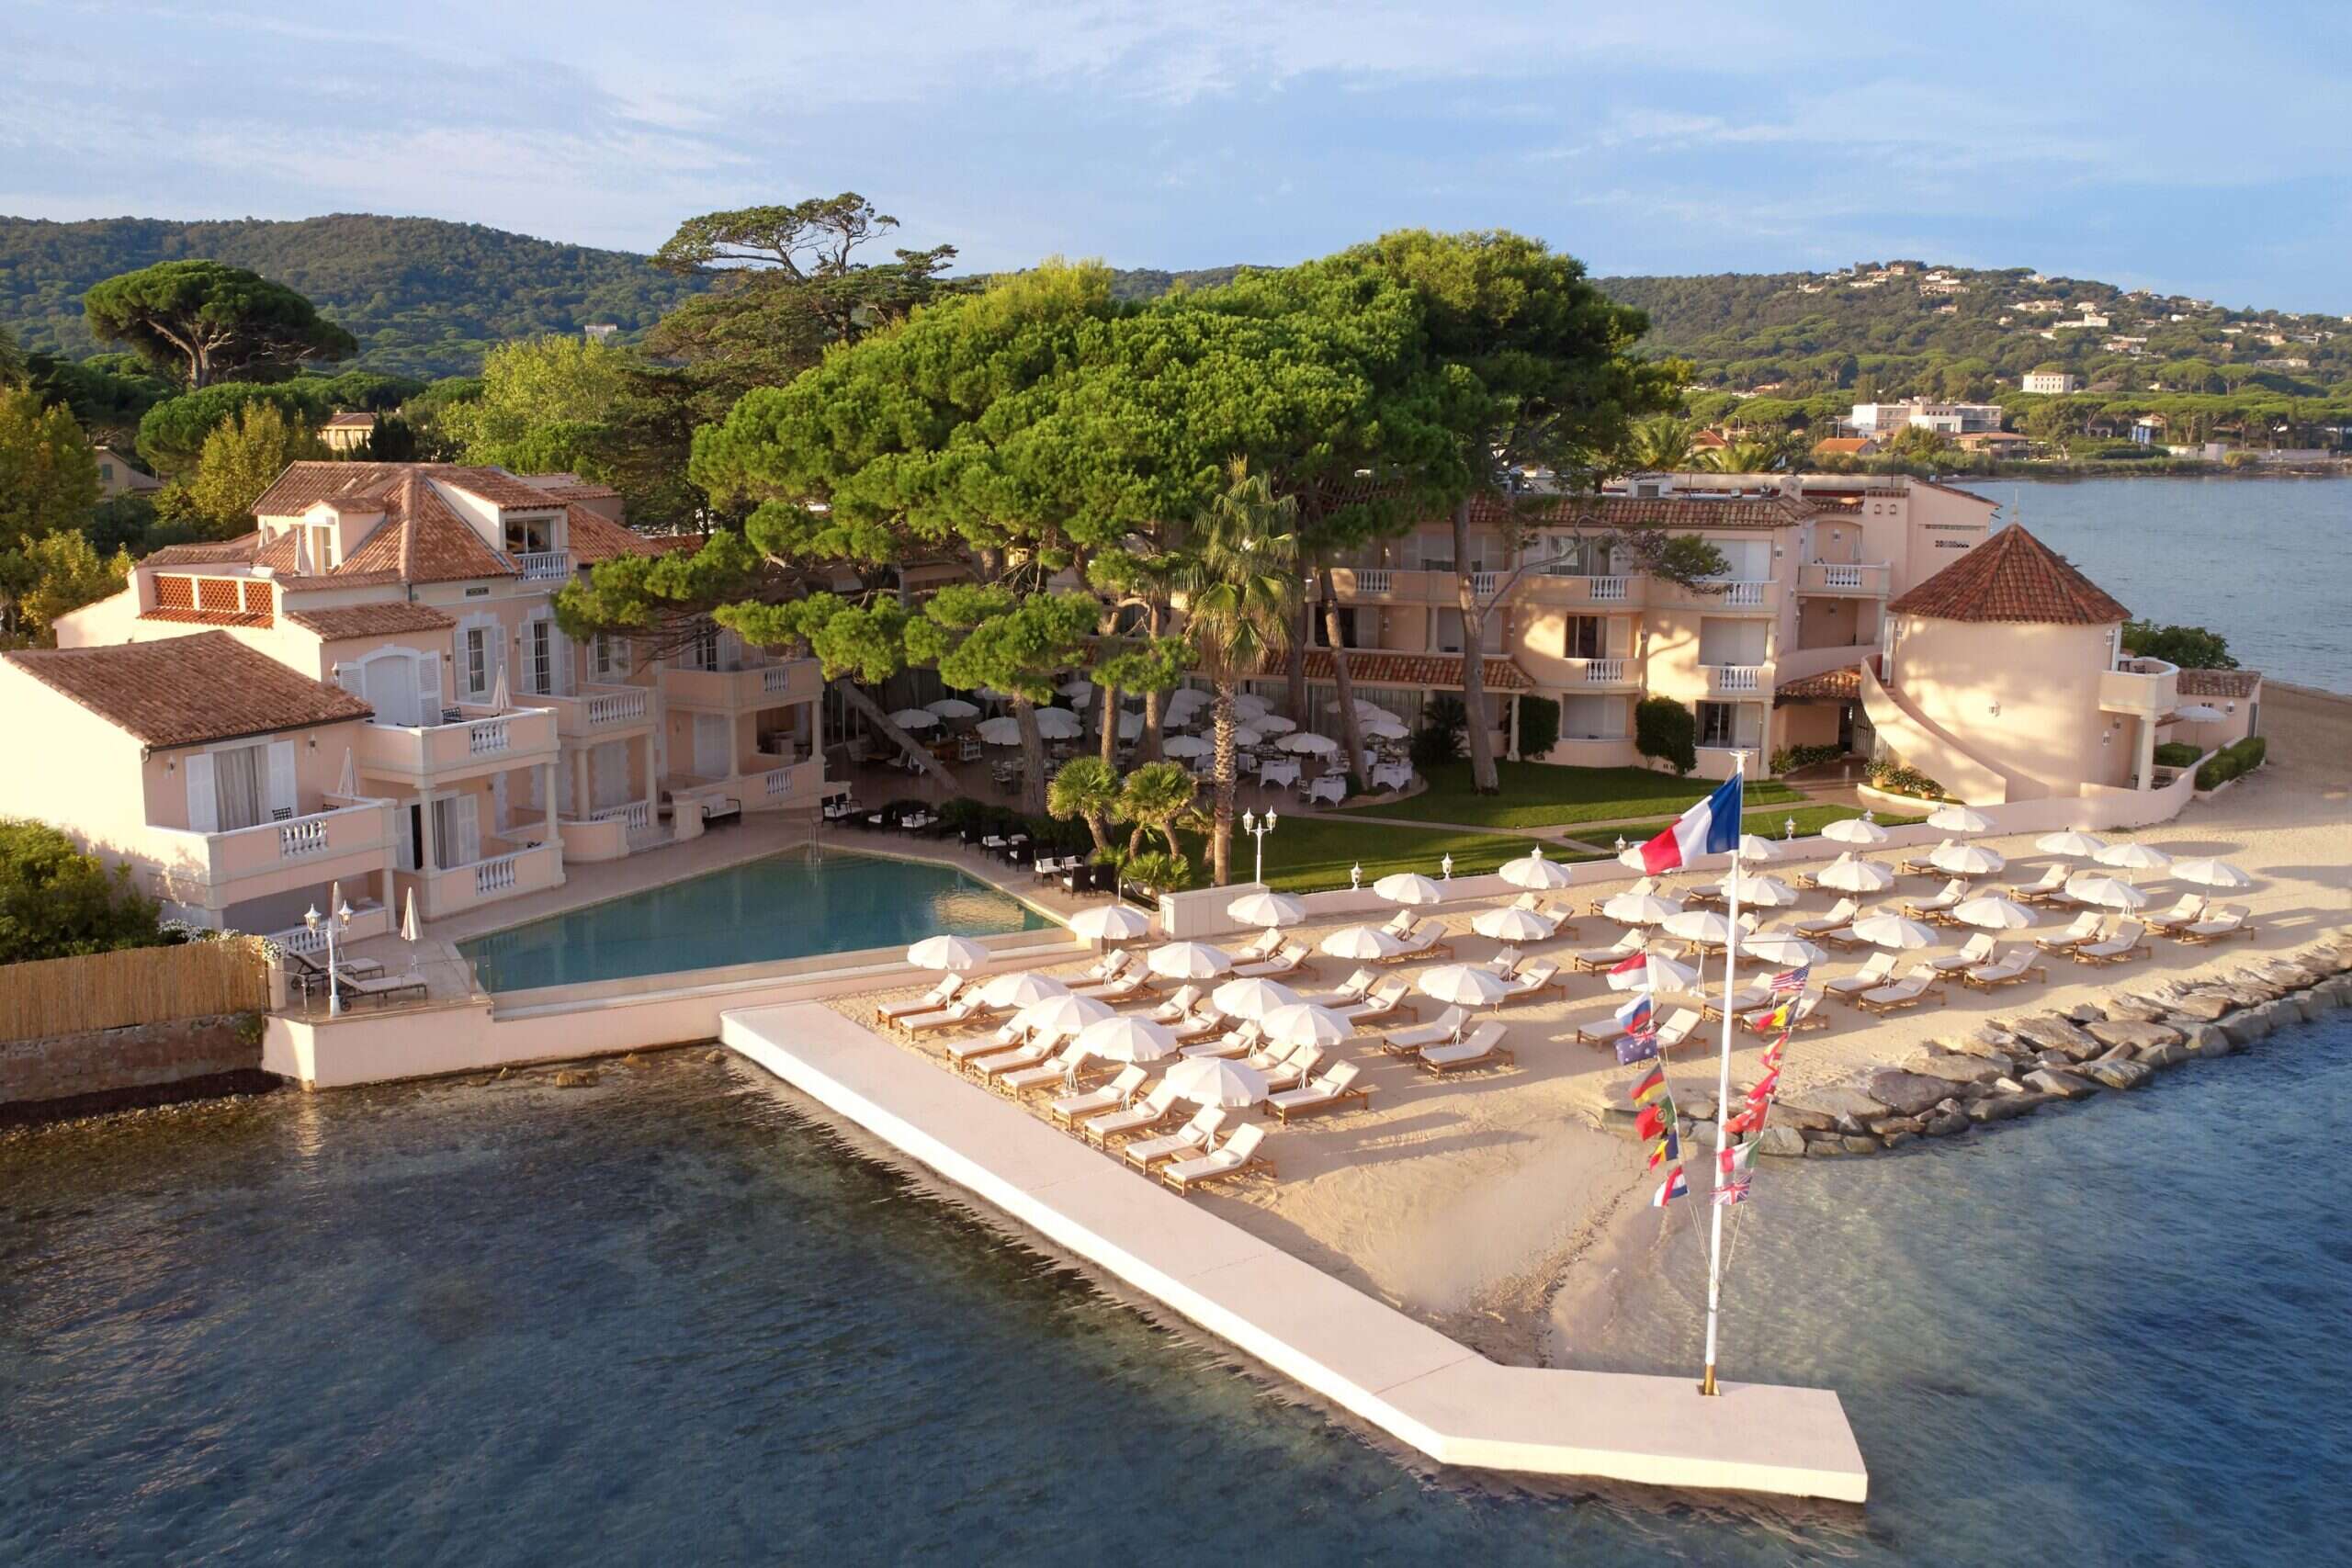 Cheval Blanc St. Tropez in South of France